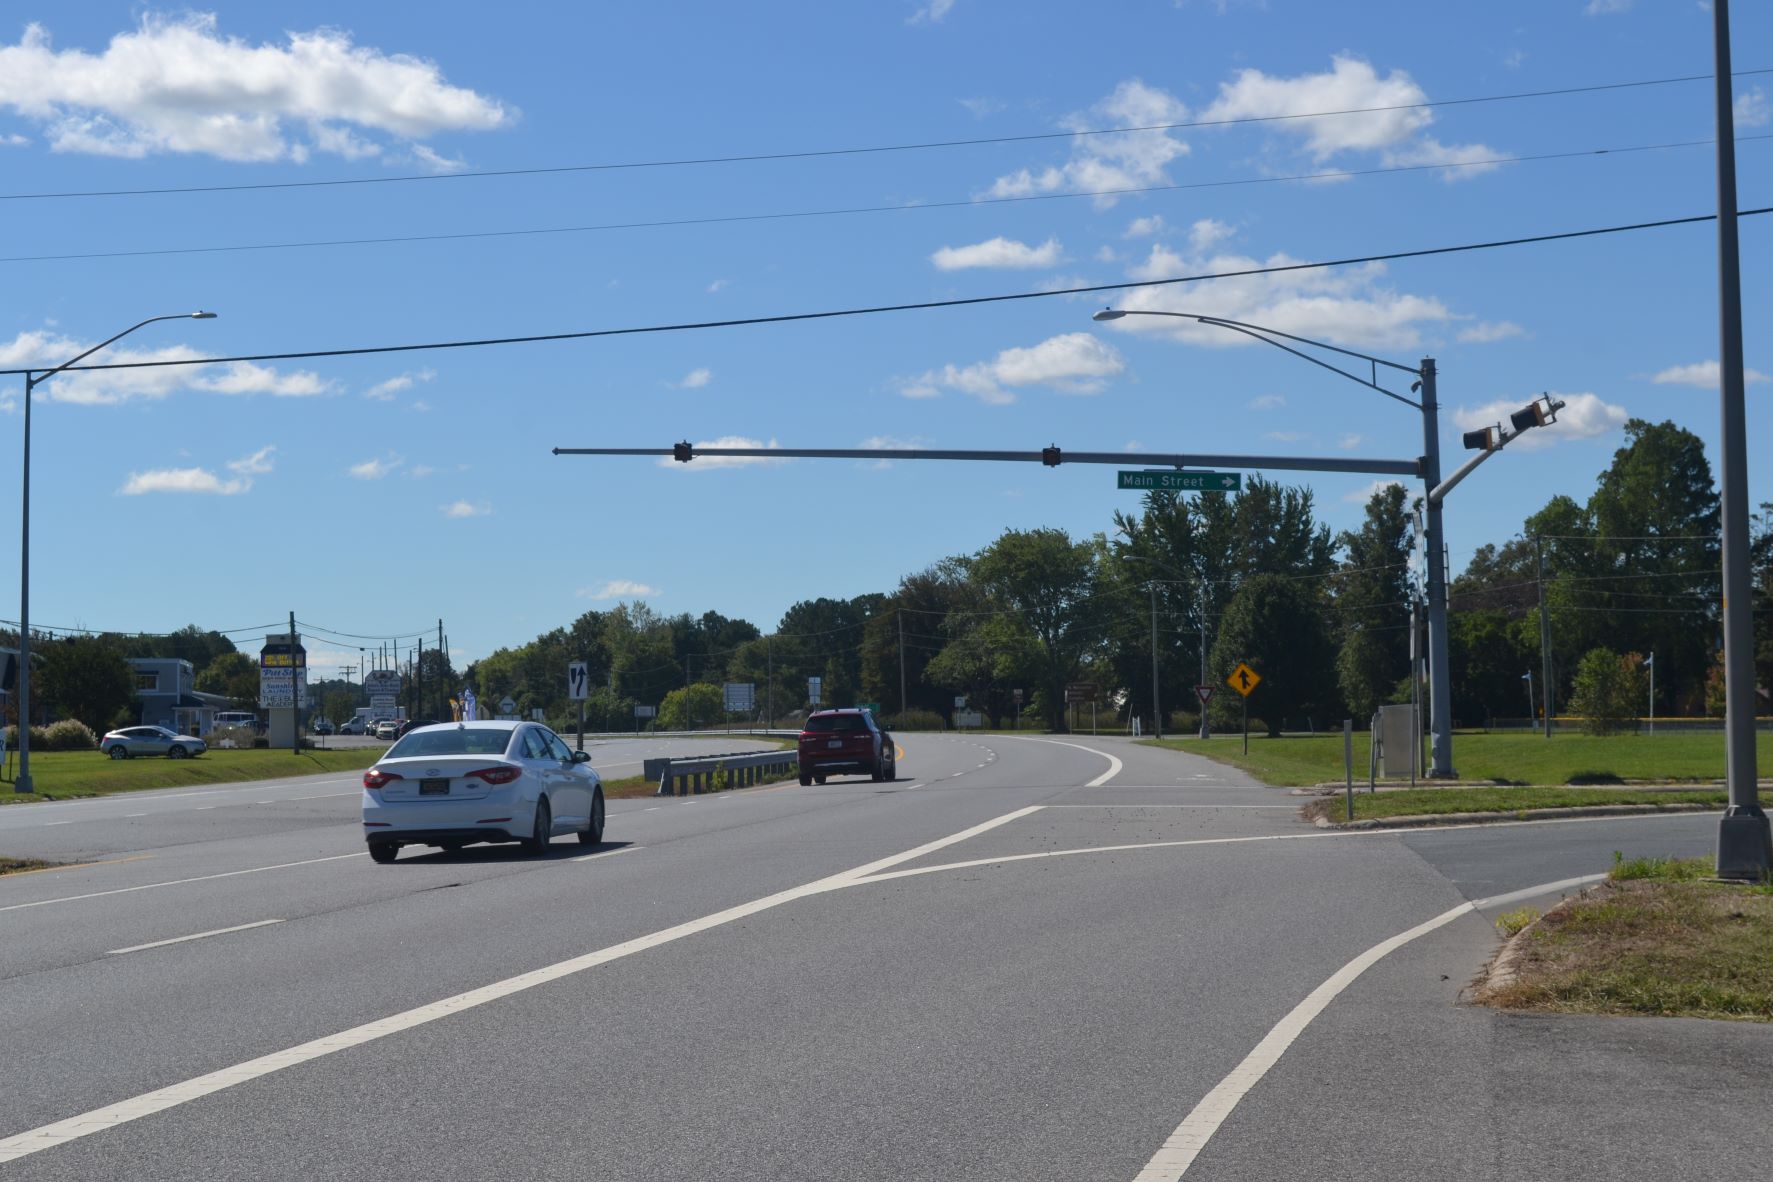 Traffic light to be installed at the intersection of route 113 in Berlin